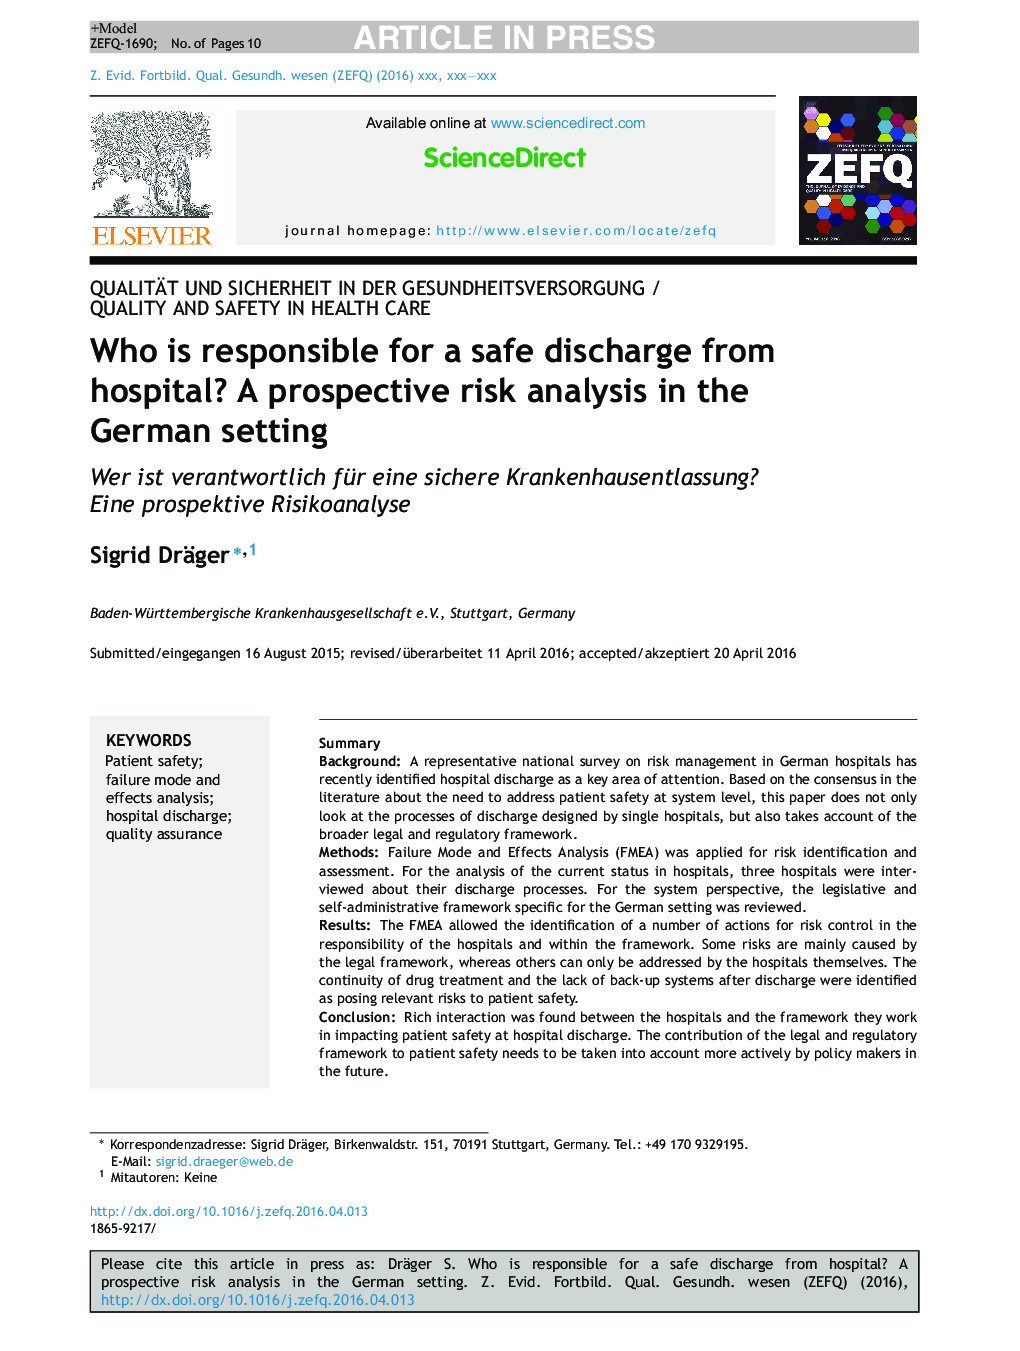 Who is responsible for a safe discharge from hospital? A prospective risk analysis in the German setting